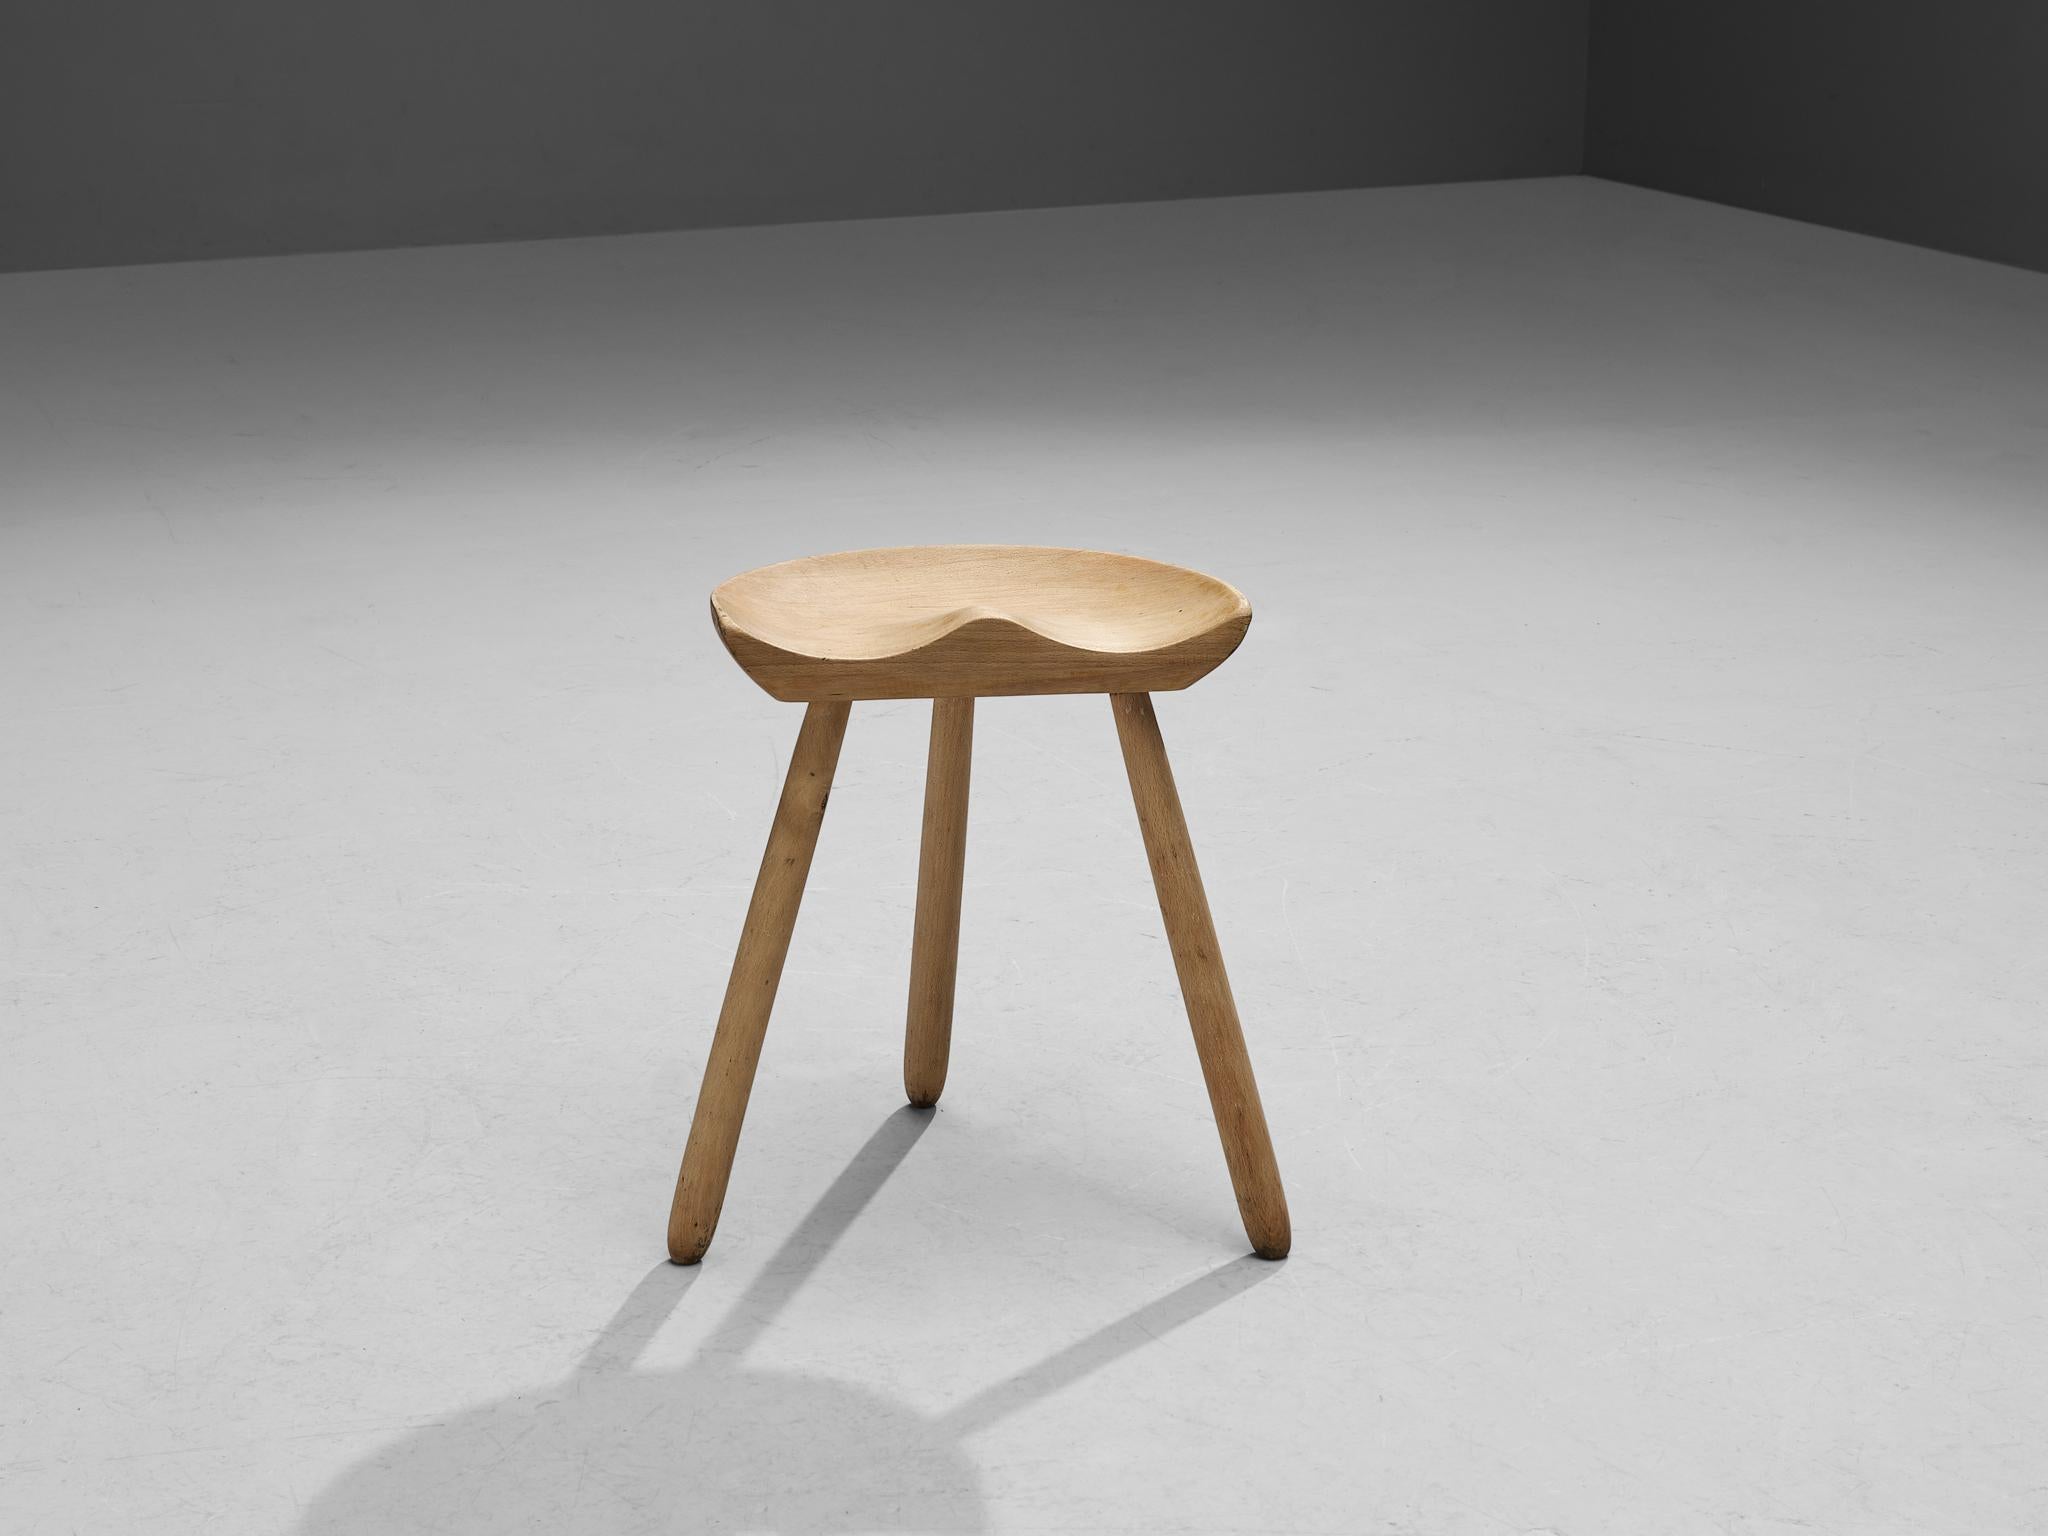 Arne Hovmand-Olsen, milking stool, beech, Denmark, 1950s. 

This Danish tripod stool by Arne Hovmand-Olsen contains a remarkable halved seat, which proves that it was inspired by the traditional milking stools. Despite the sturdy look of the design,